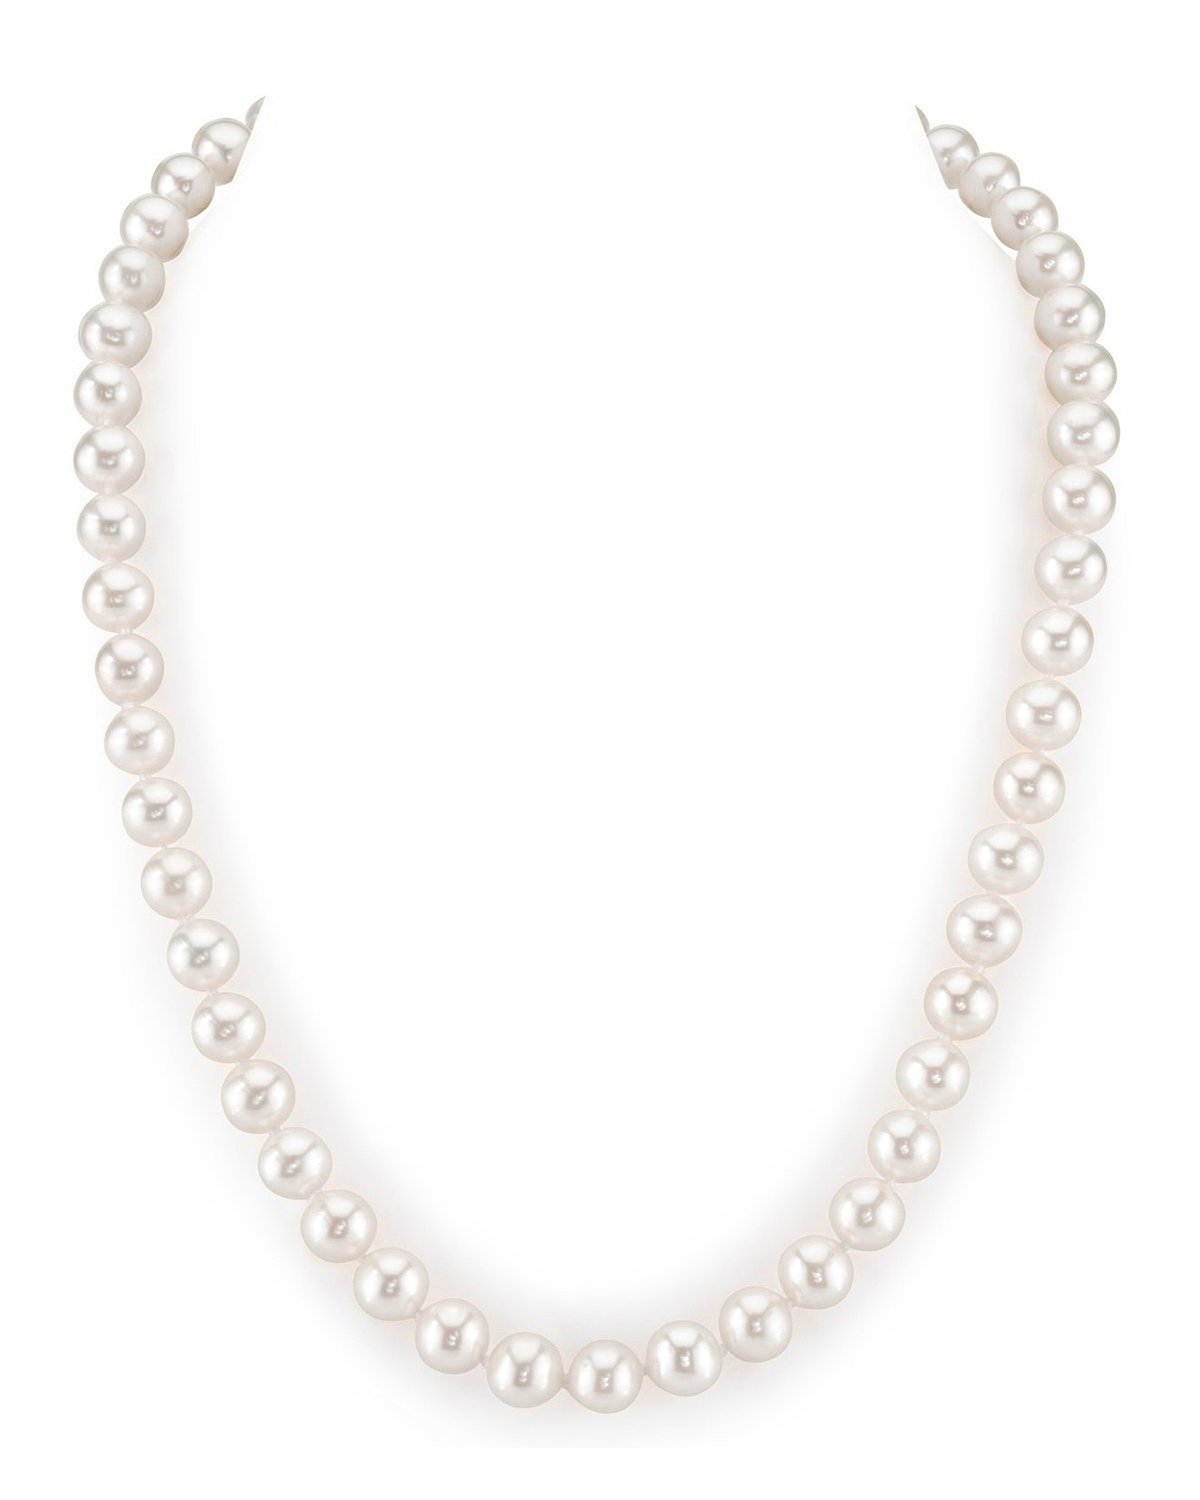 8-9mm White Freshwater Choker Length Pearl Necklace